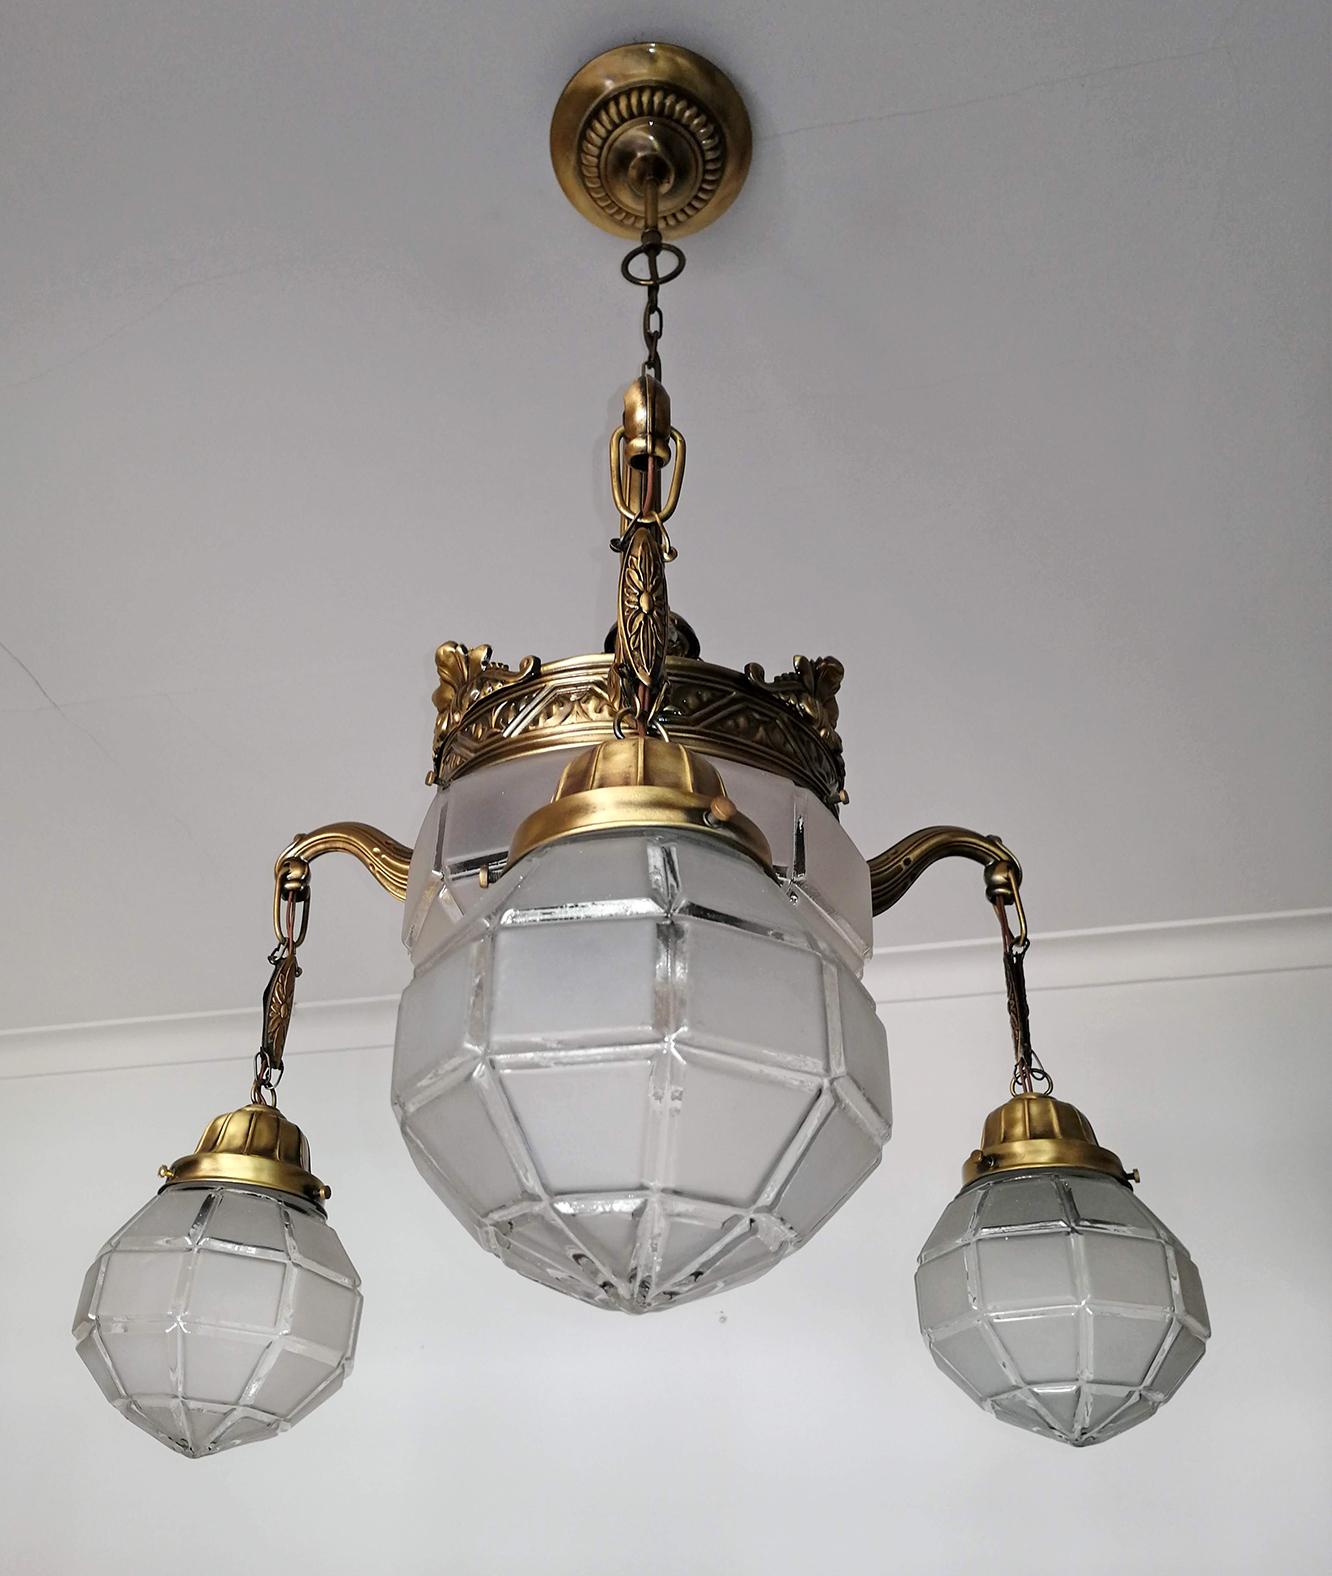 French Degué style Art Deco white frosted glass, 4-light chandelier/ brass
4 light bulbs E27
Good working condition
Measures:
Diameter 27.6 in / 70 cm
Height 30 in (chain 11 in)/ 76 cm (chain 28 cm)
Weight: 8 lb. (3.5 kg).
Assembly required. Bulbs